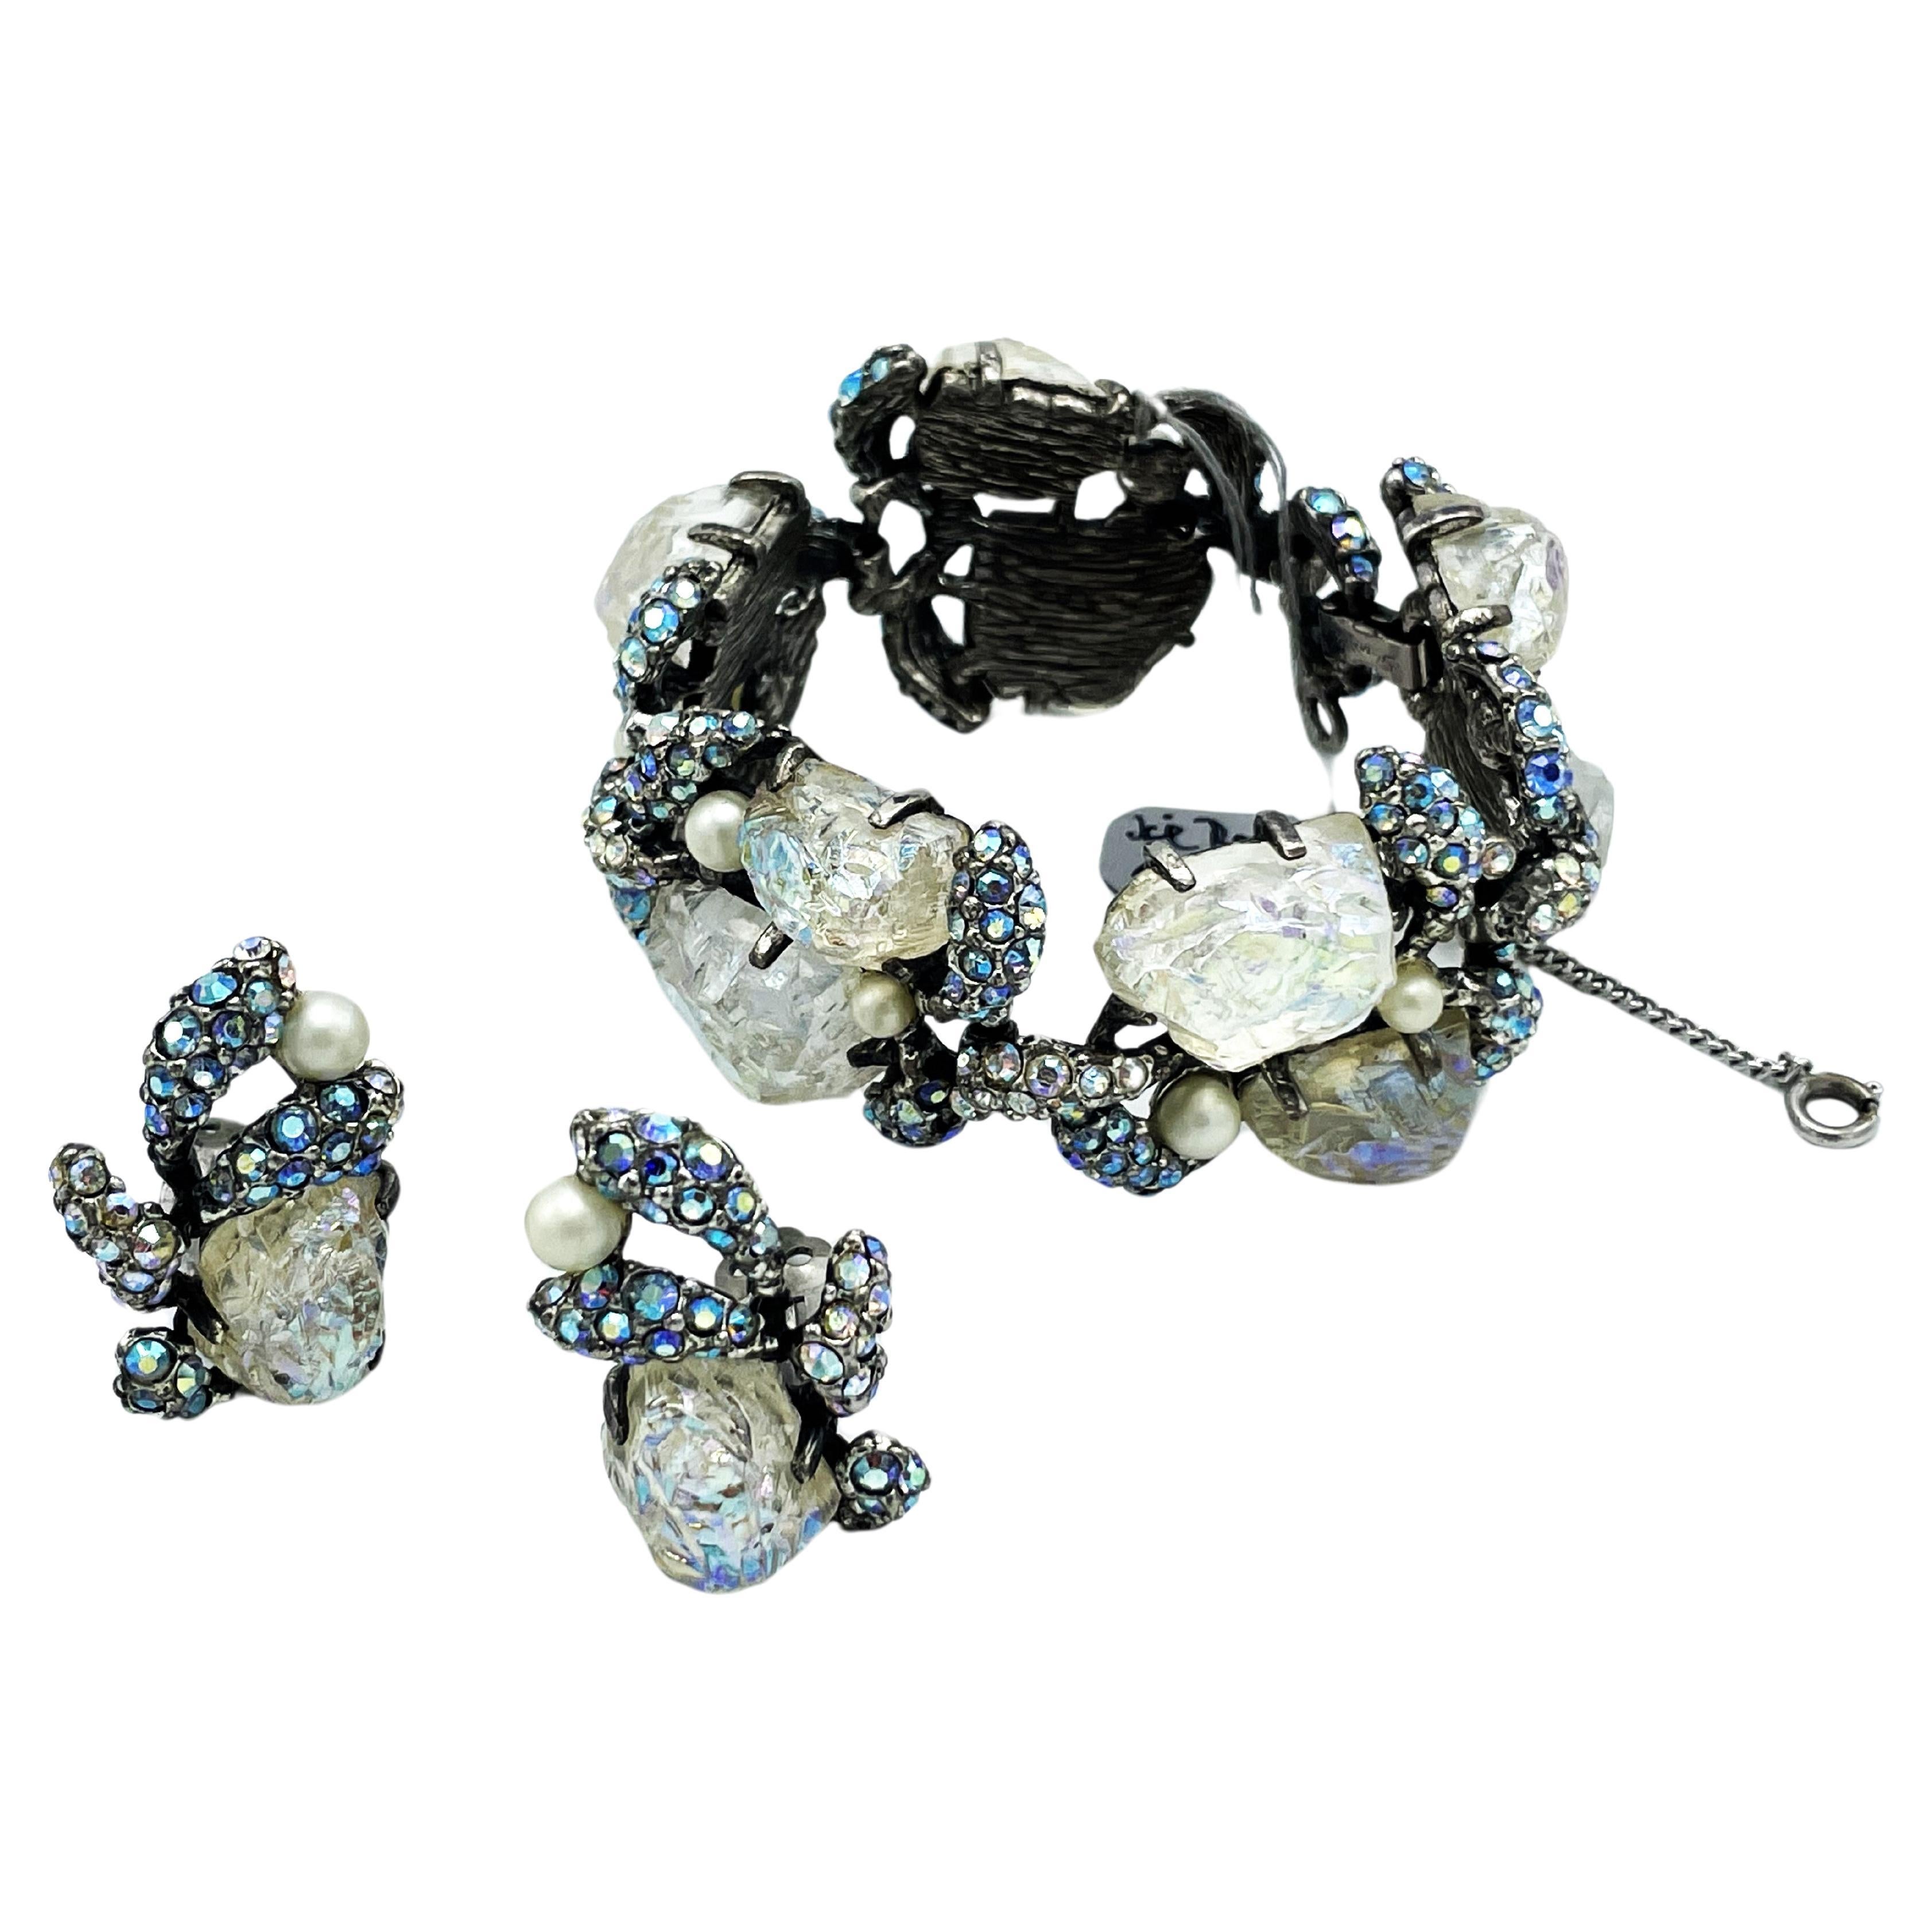 A fantastic bracelet with matching ear clips from Schiaparlli from 1950s Italy.
The bracelet consists of 5 links, each with 2 ice rock glass stones, 2 handcrafted beads and many aurescent small rhinestones. The ear clips match.

Measurement
The